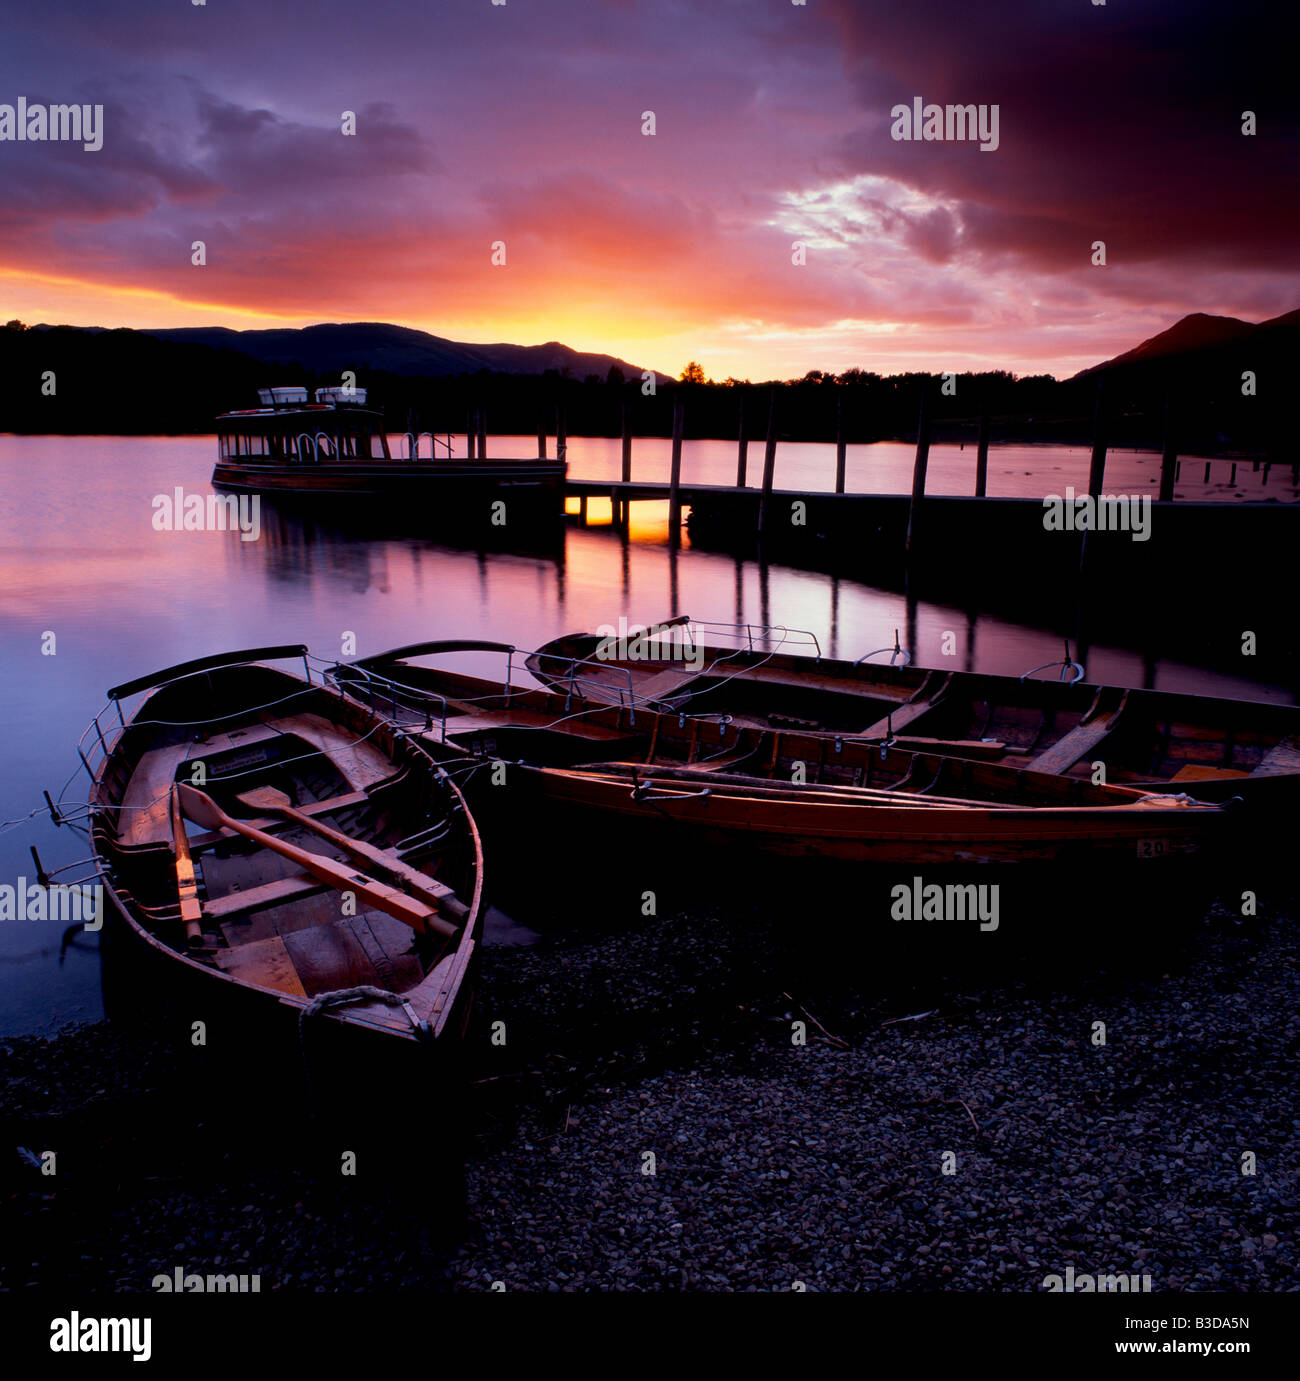 Rowing boats on Derwentwater in front of an amazing sunset at Keswick, Cumbria, England, UK Stock Photo